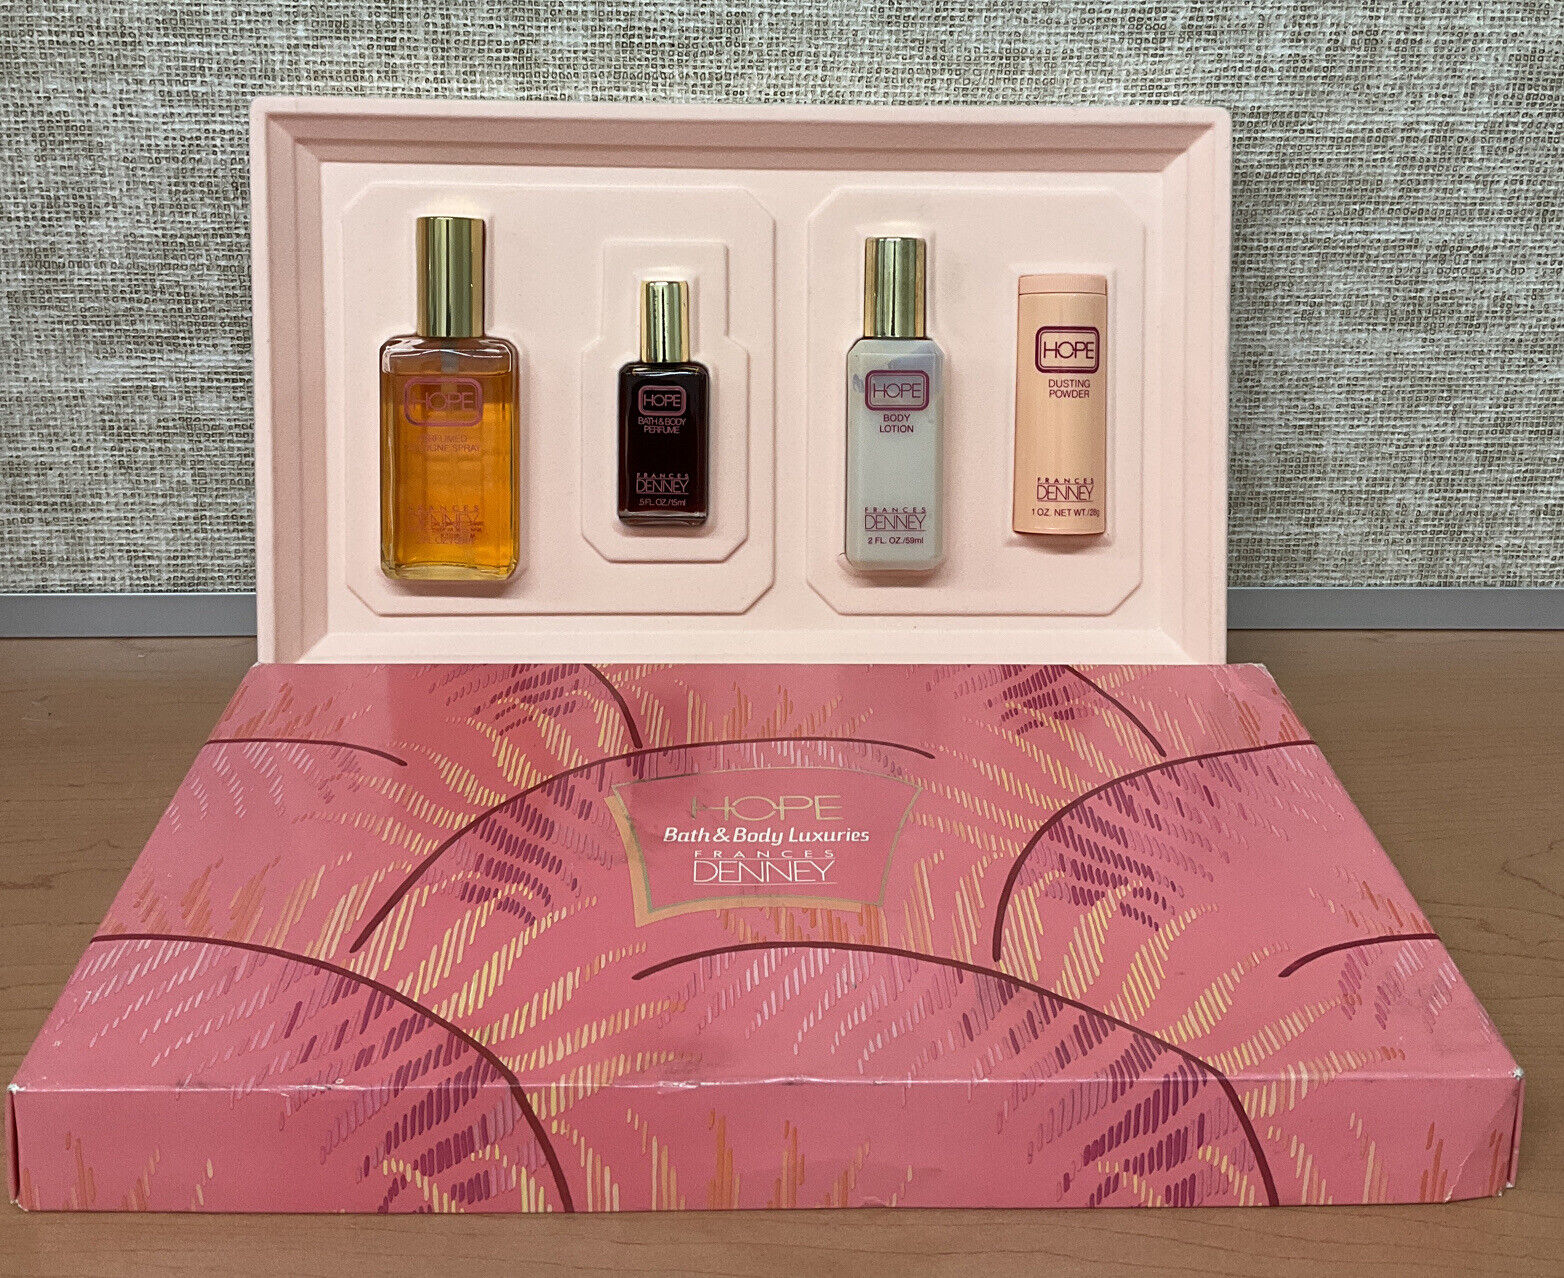 Hope Bath & Dody Luxuries Dy Frances Denney 4 Pieces Set As Pictured